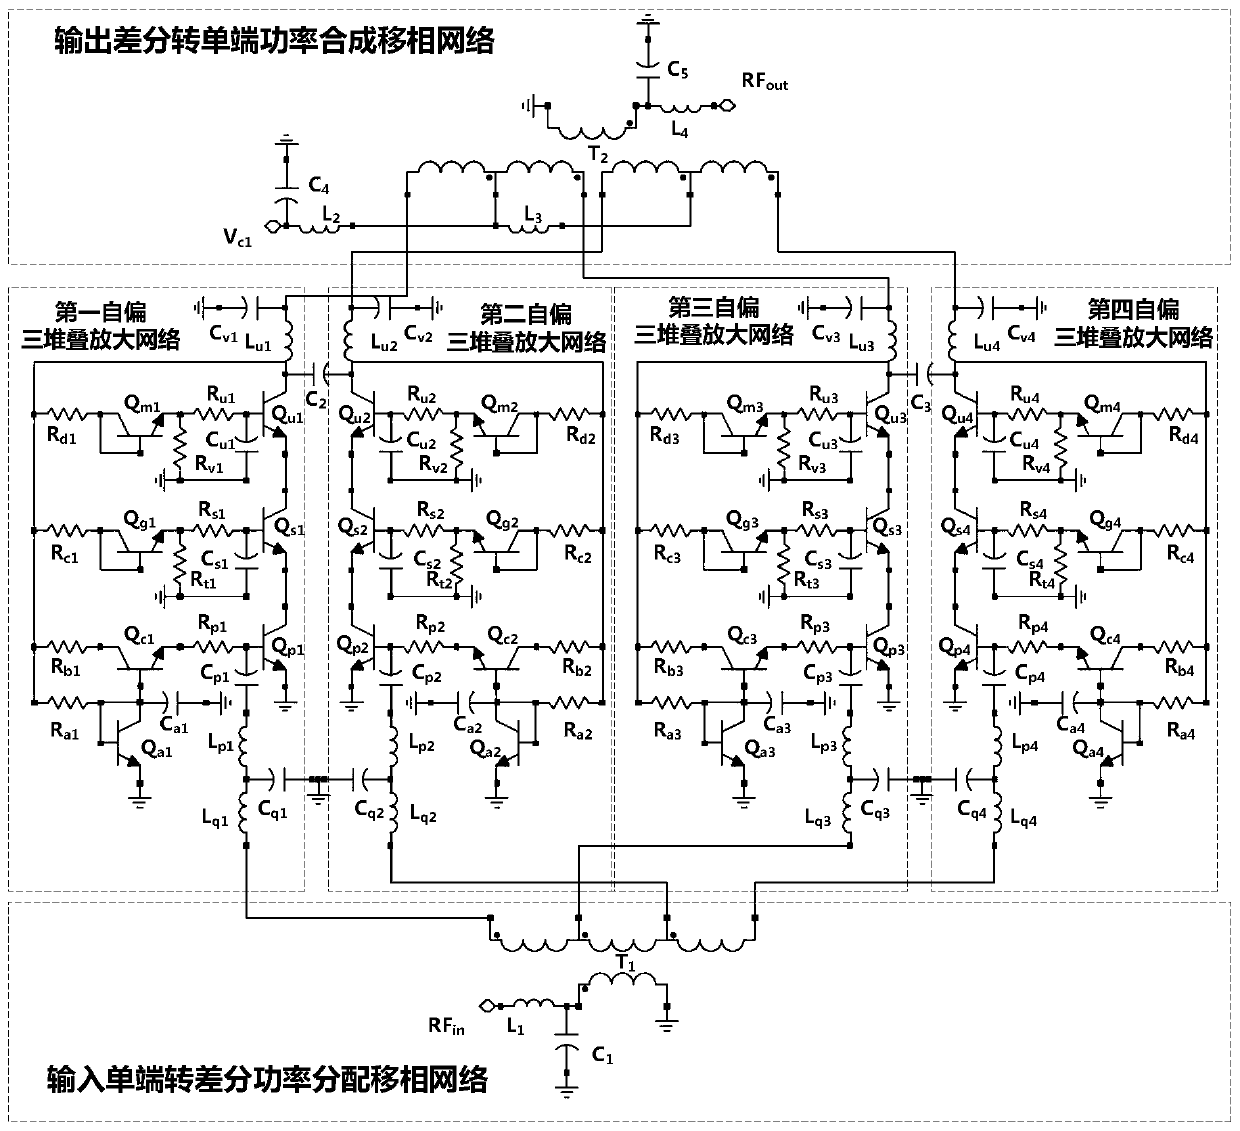 High-efficiency power amplifier for Internet of Vehicles communication